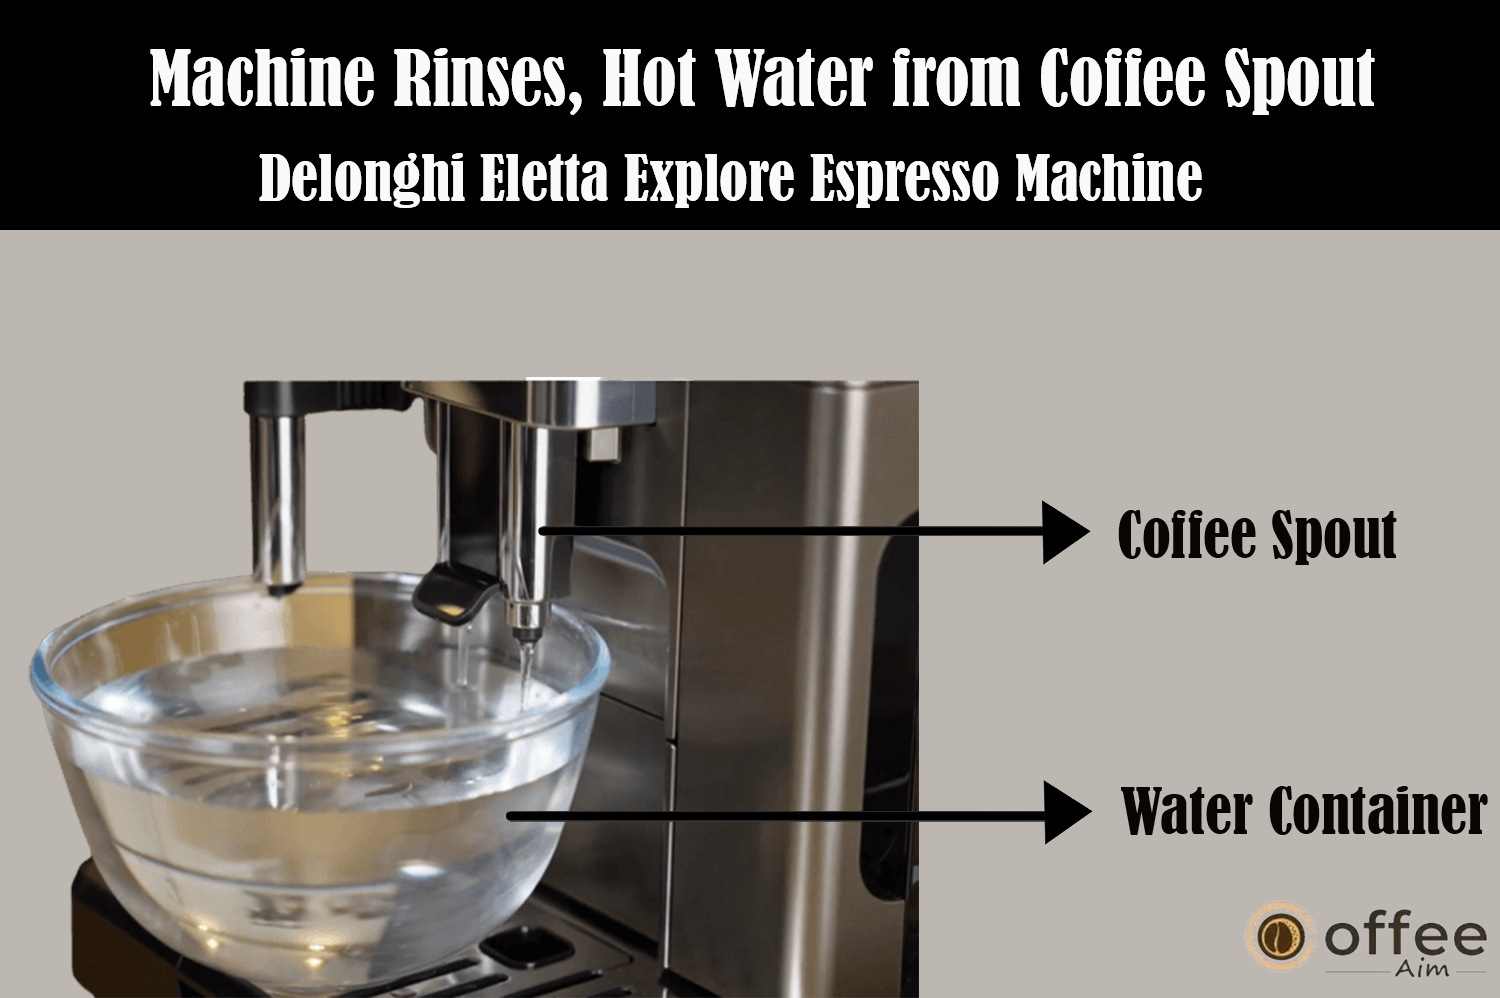 This image illustrates that after the brewing process, the De'Longhi Eletta Explore Espresso Machine will initiate a rinse cycle, dispensing hot water from its coffee spouts, as detailed in the article 'How to Use the De'Longhi Eletta Explore Espresso Machine'."